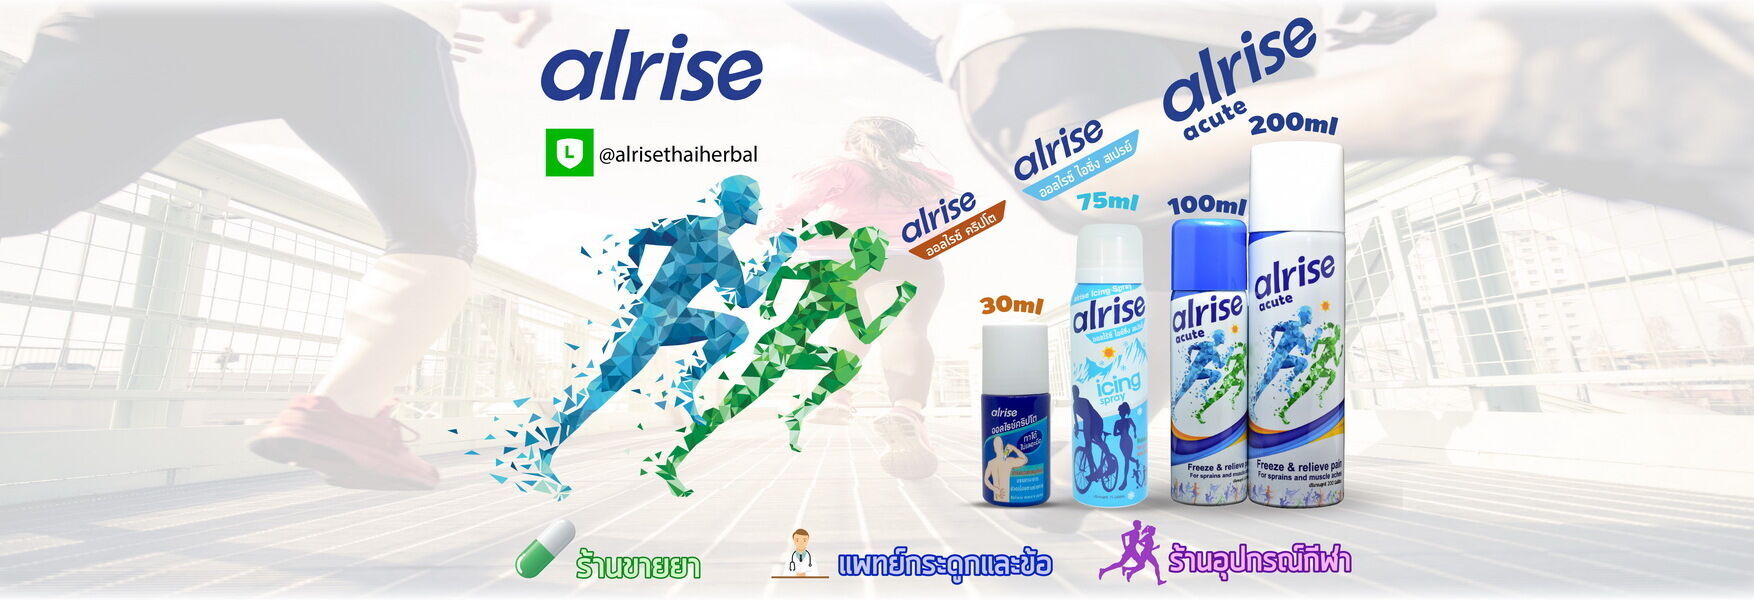 alrise product family